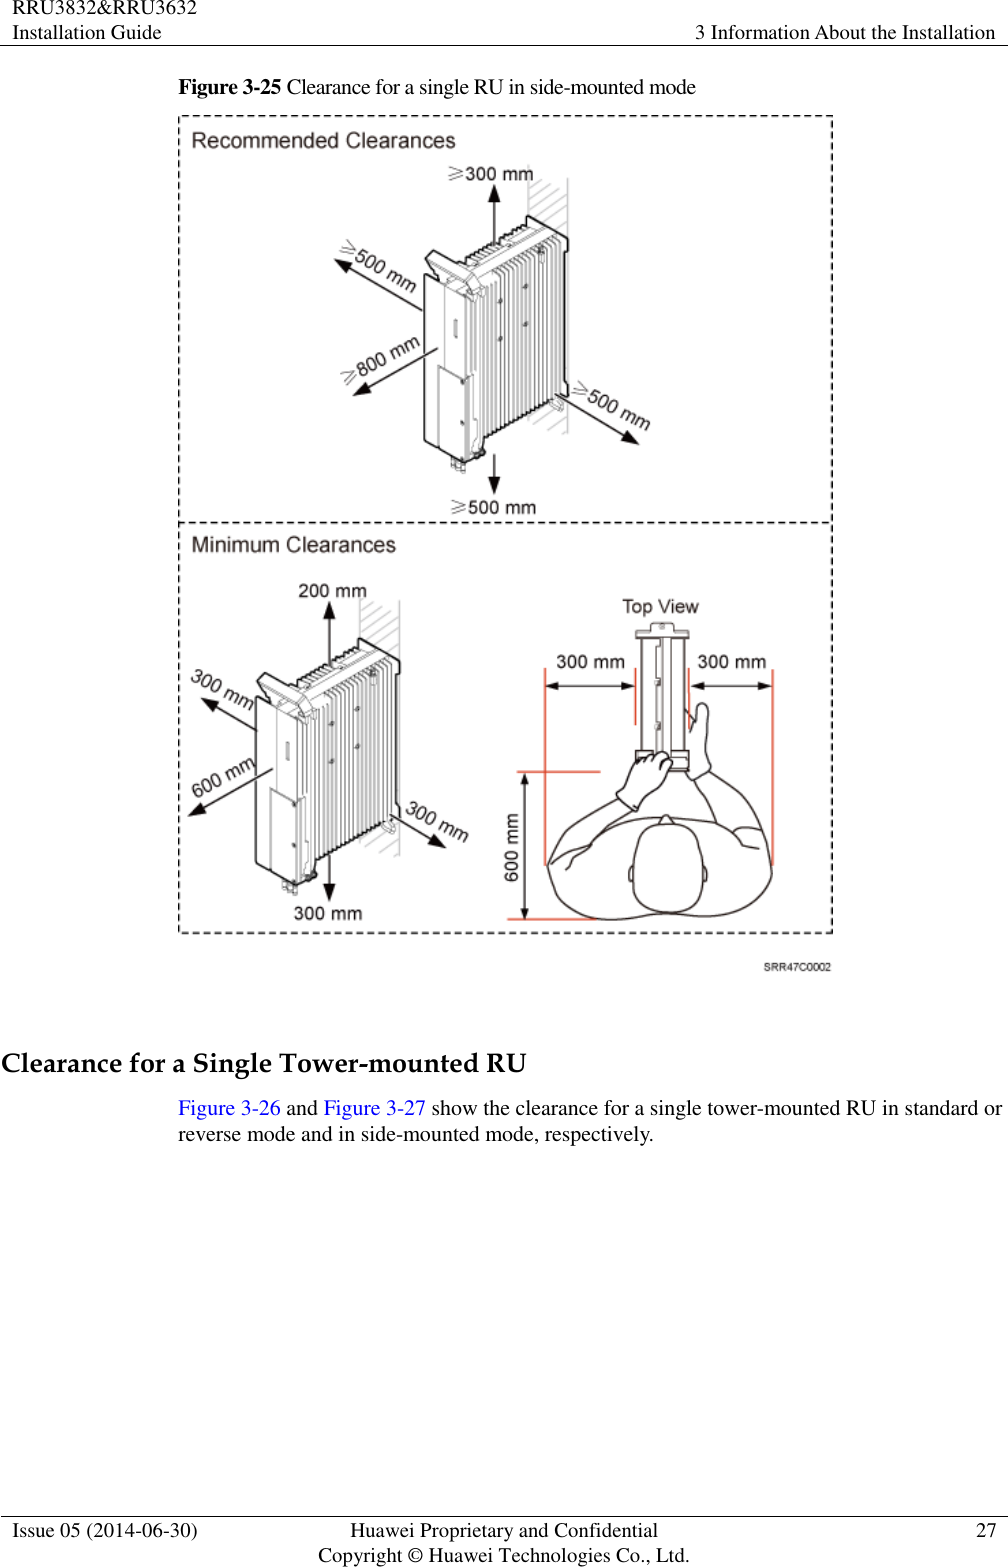 RRU3832&amp;RRU3632 Installation Guide 3 Information About the Installation  Issue 05 (2014-06-30) Huawei Proprietary and Confidential                                     Copyright © Huawei Technologies Co., Ltd. 27  Figure 3-25 Clearance for a single RU in side-mounted mode   Clearance for a Single Tower-mounted RU Figure 3-26 and Figure 3-27 show the clearance for a single tower-mounted RU in standard or reverse mode and in side-mounted mode, respectively. 